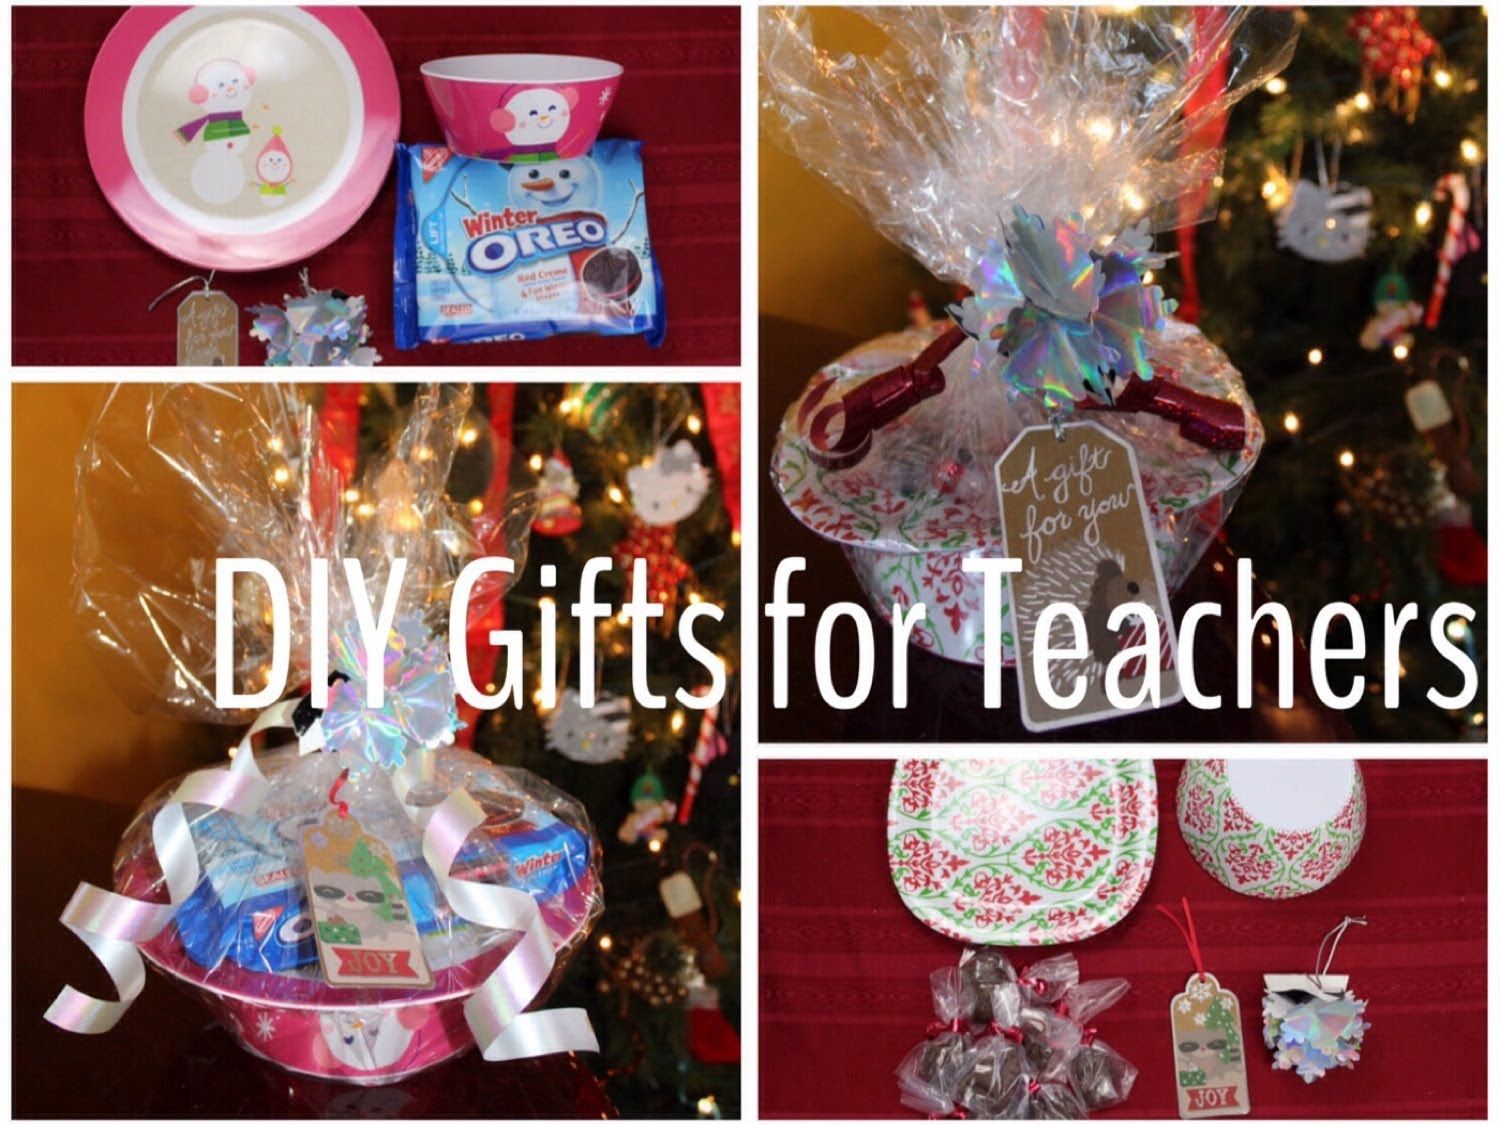 DIY Christmas Gifts for Teachers (Budget Friendly) -   DIY gifts on a budget Ideas